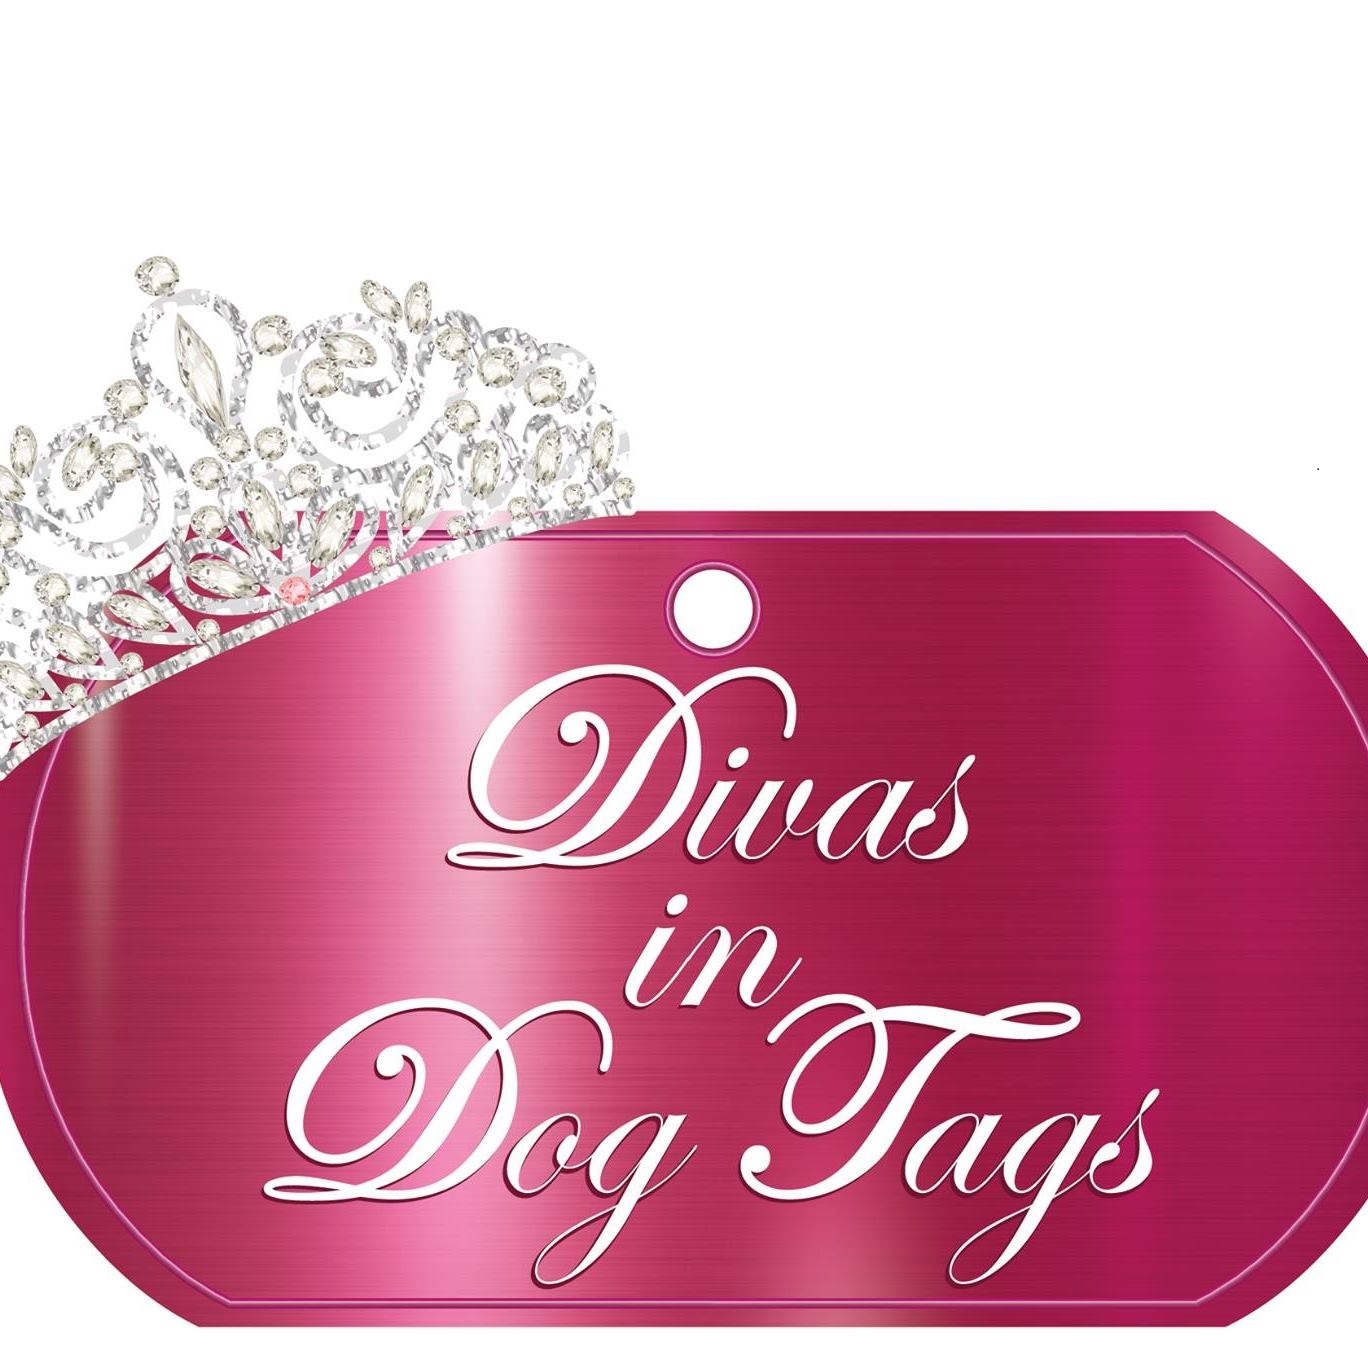 Divas in Dog Tags